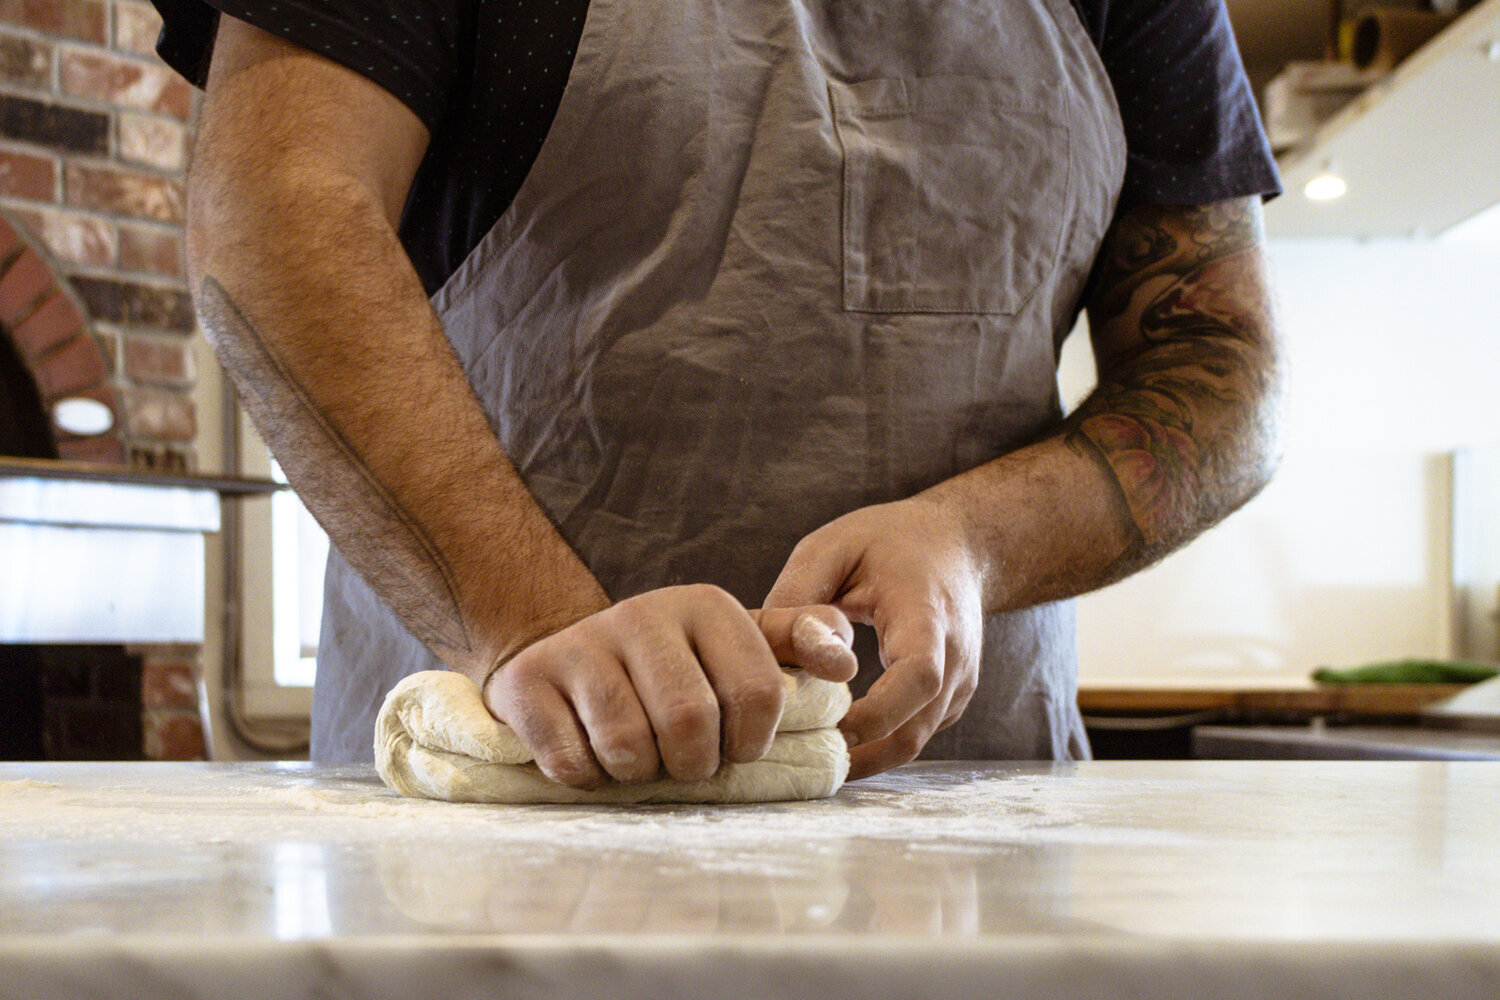  Breaking Bread is a grassroots movement to support Vancouver restaurants and the hospitality industry. In order to launch, Breaking Bread required website development, graphic design, media relations, a social media marketing strategy and ongoing so